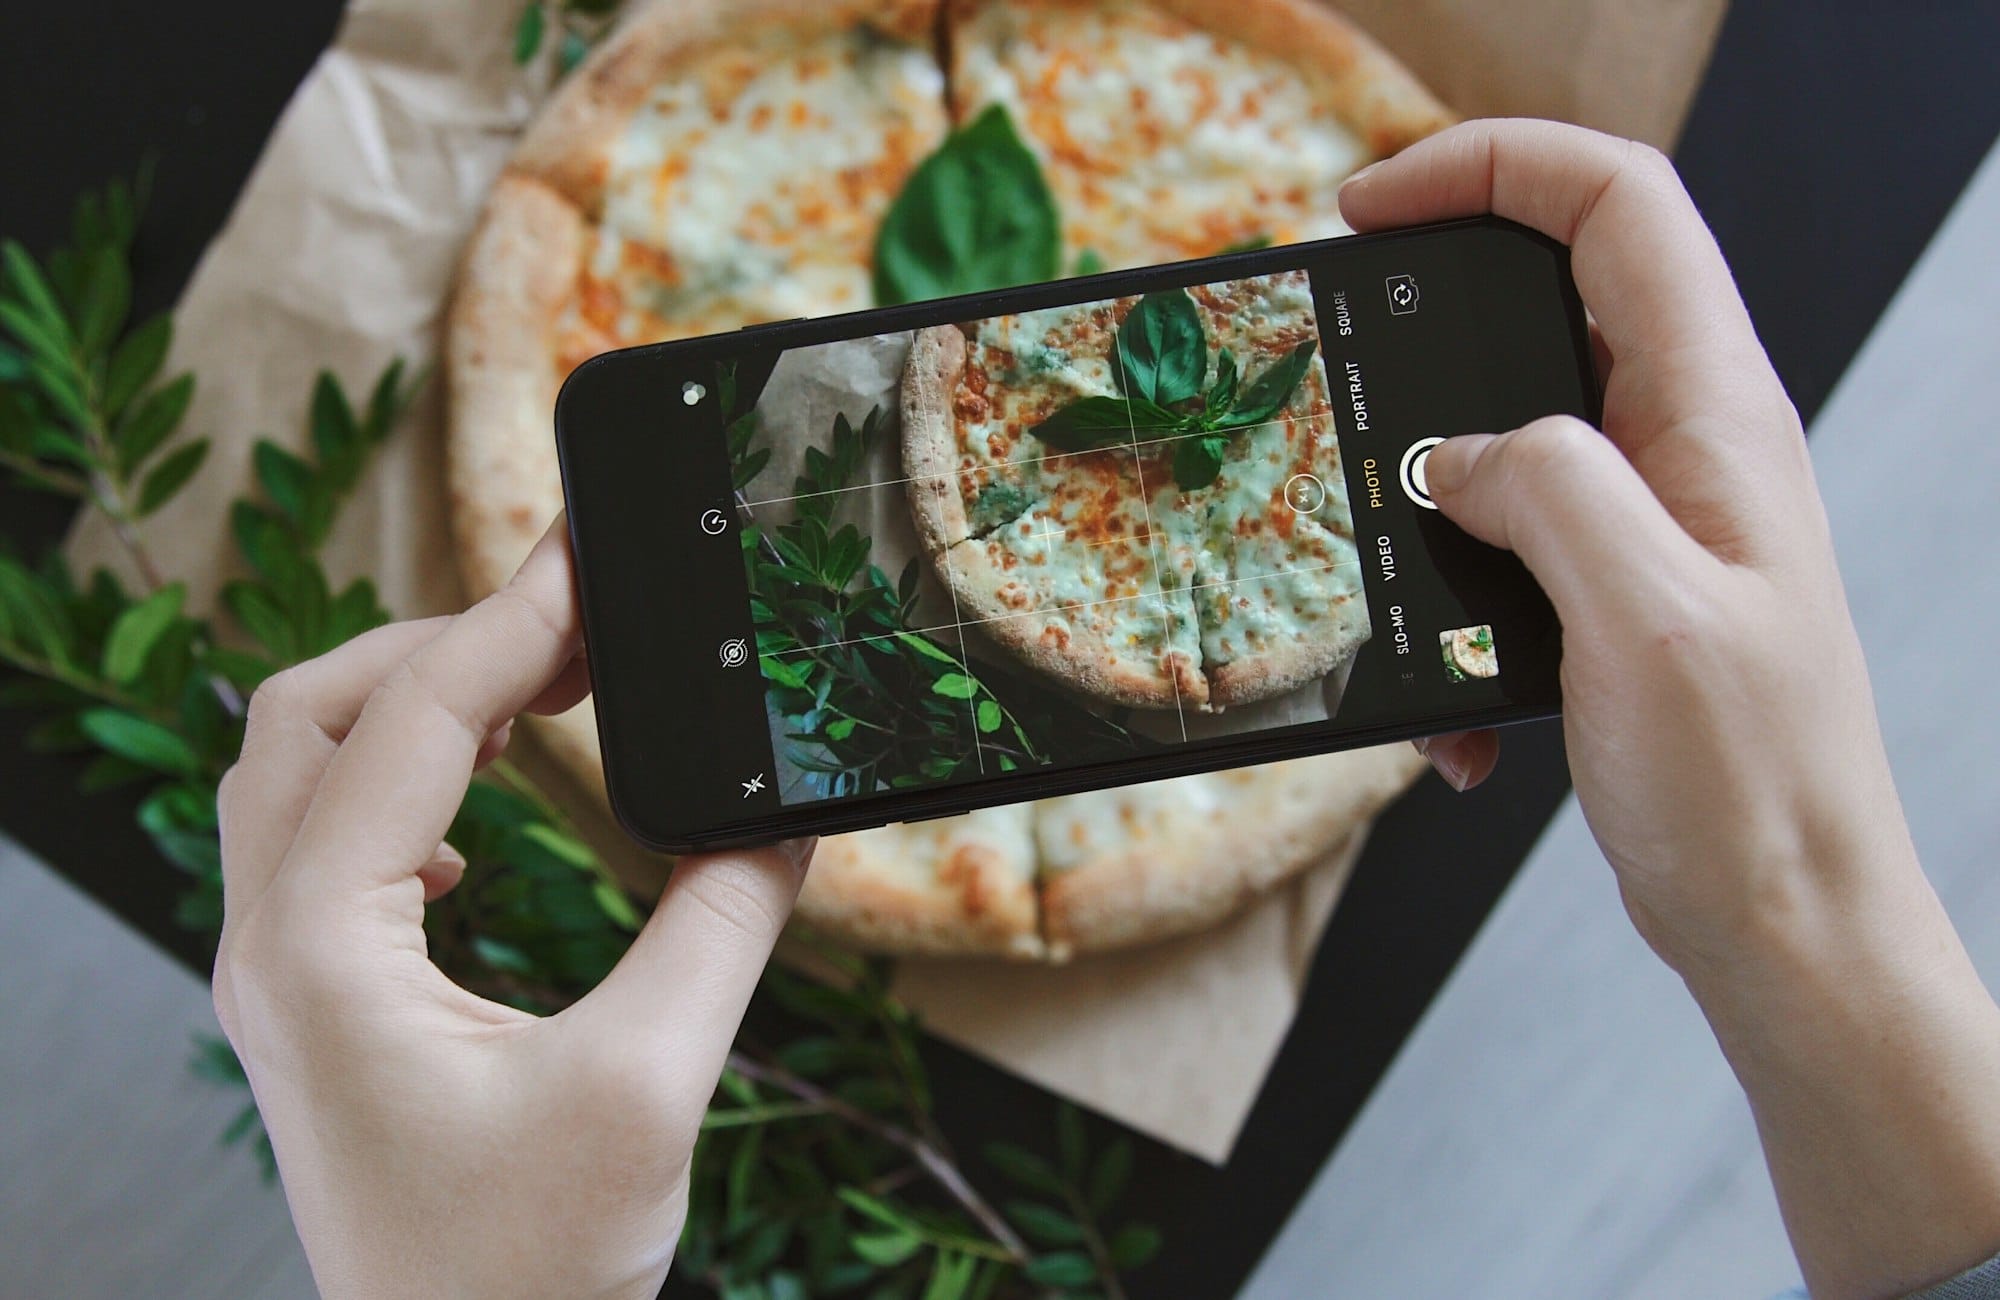 Food blogger. Food photography. Pizza.